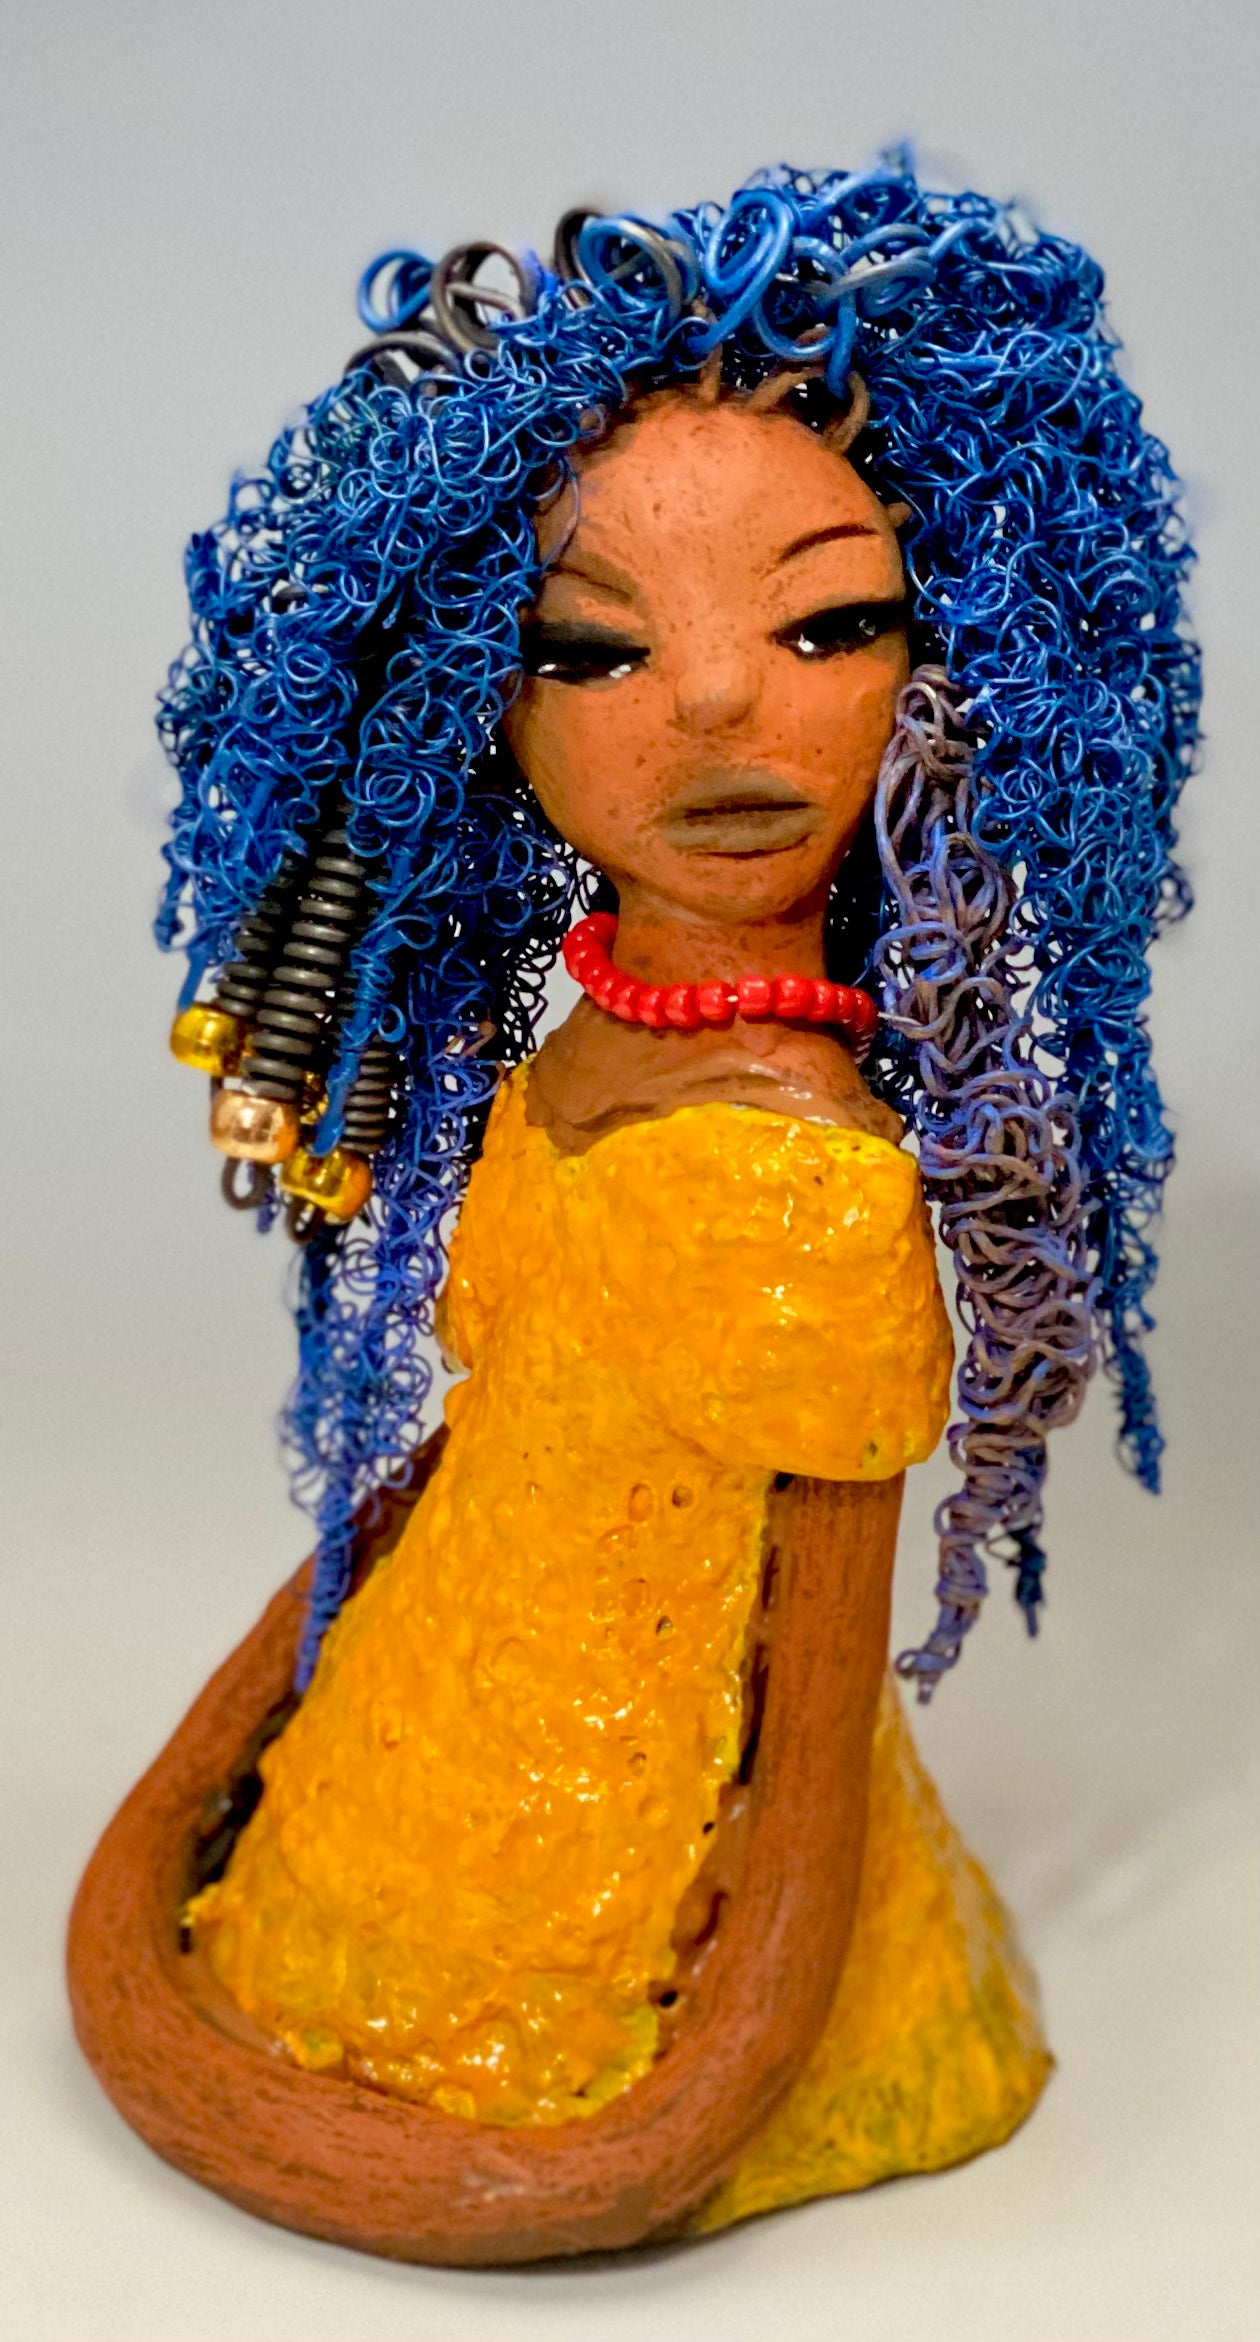 Makeba stands 8" x 5" x 5" and weighs 1.4 lbs. She has a lovely honey brown complexion with cocoa red lips. She has long twisted  blue wire locs hairstyle waist down!  Makeba has a sunset yellow red glazed dress. She has over 75 feet of 16 and 24 gauge blue wire for hair. It took over 5 hours just to do her hair! With  eyes wide opened and a subdue look, Makeba has hope of finding a new home.